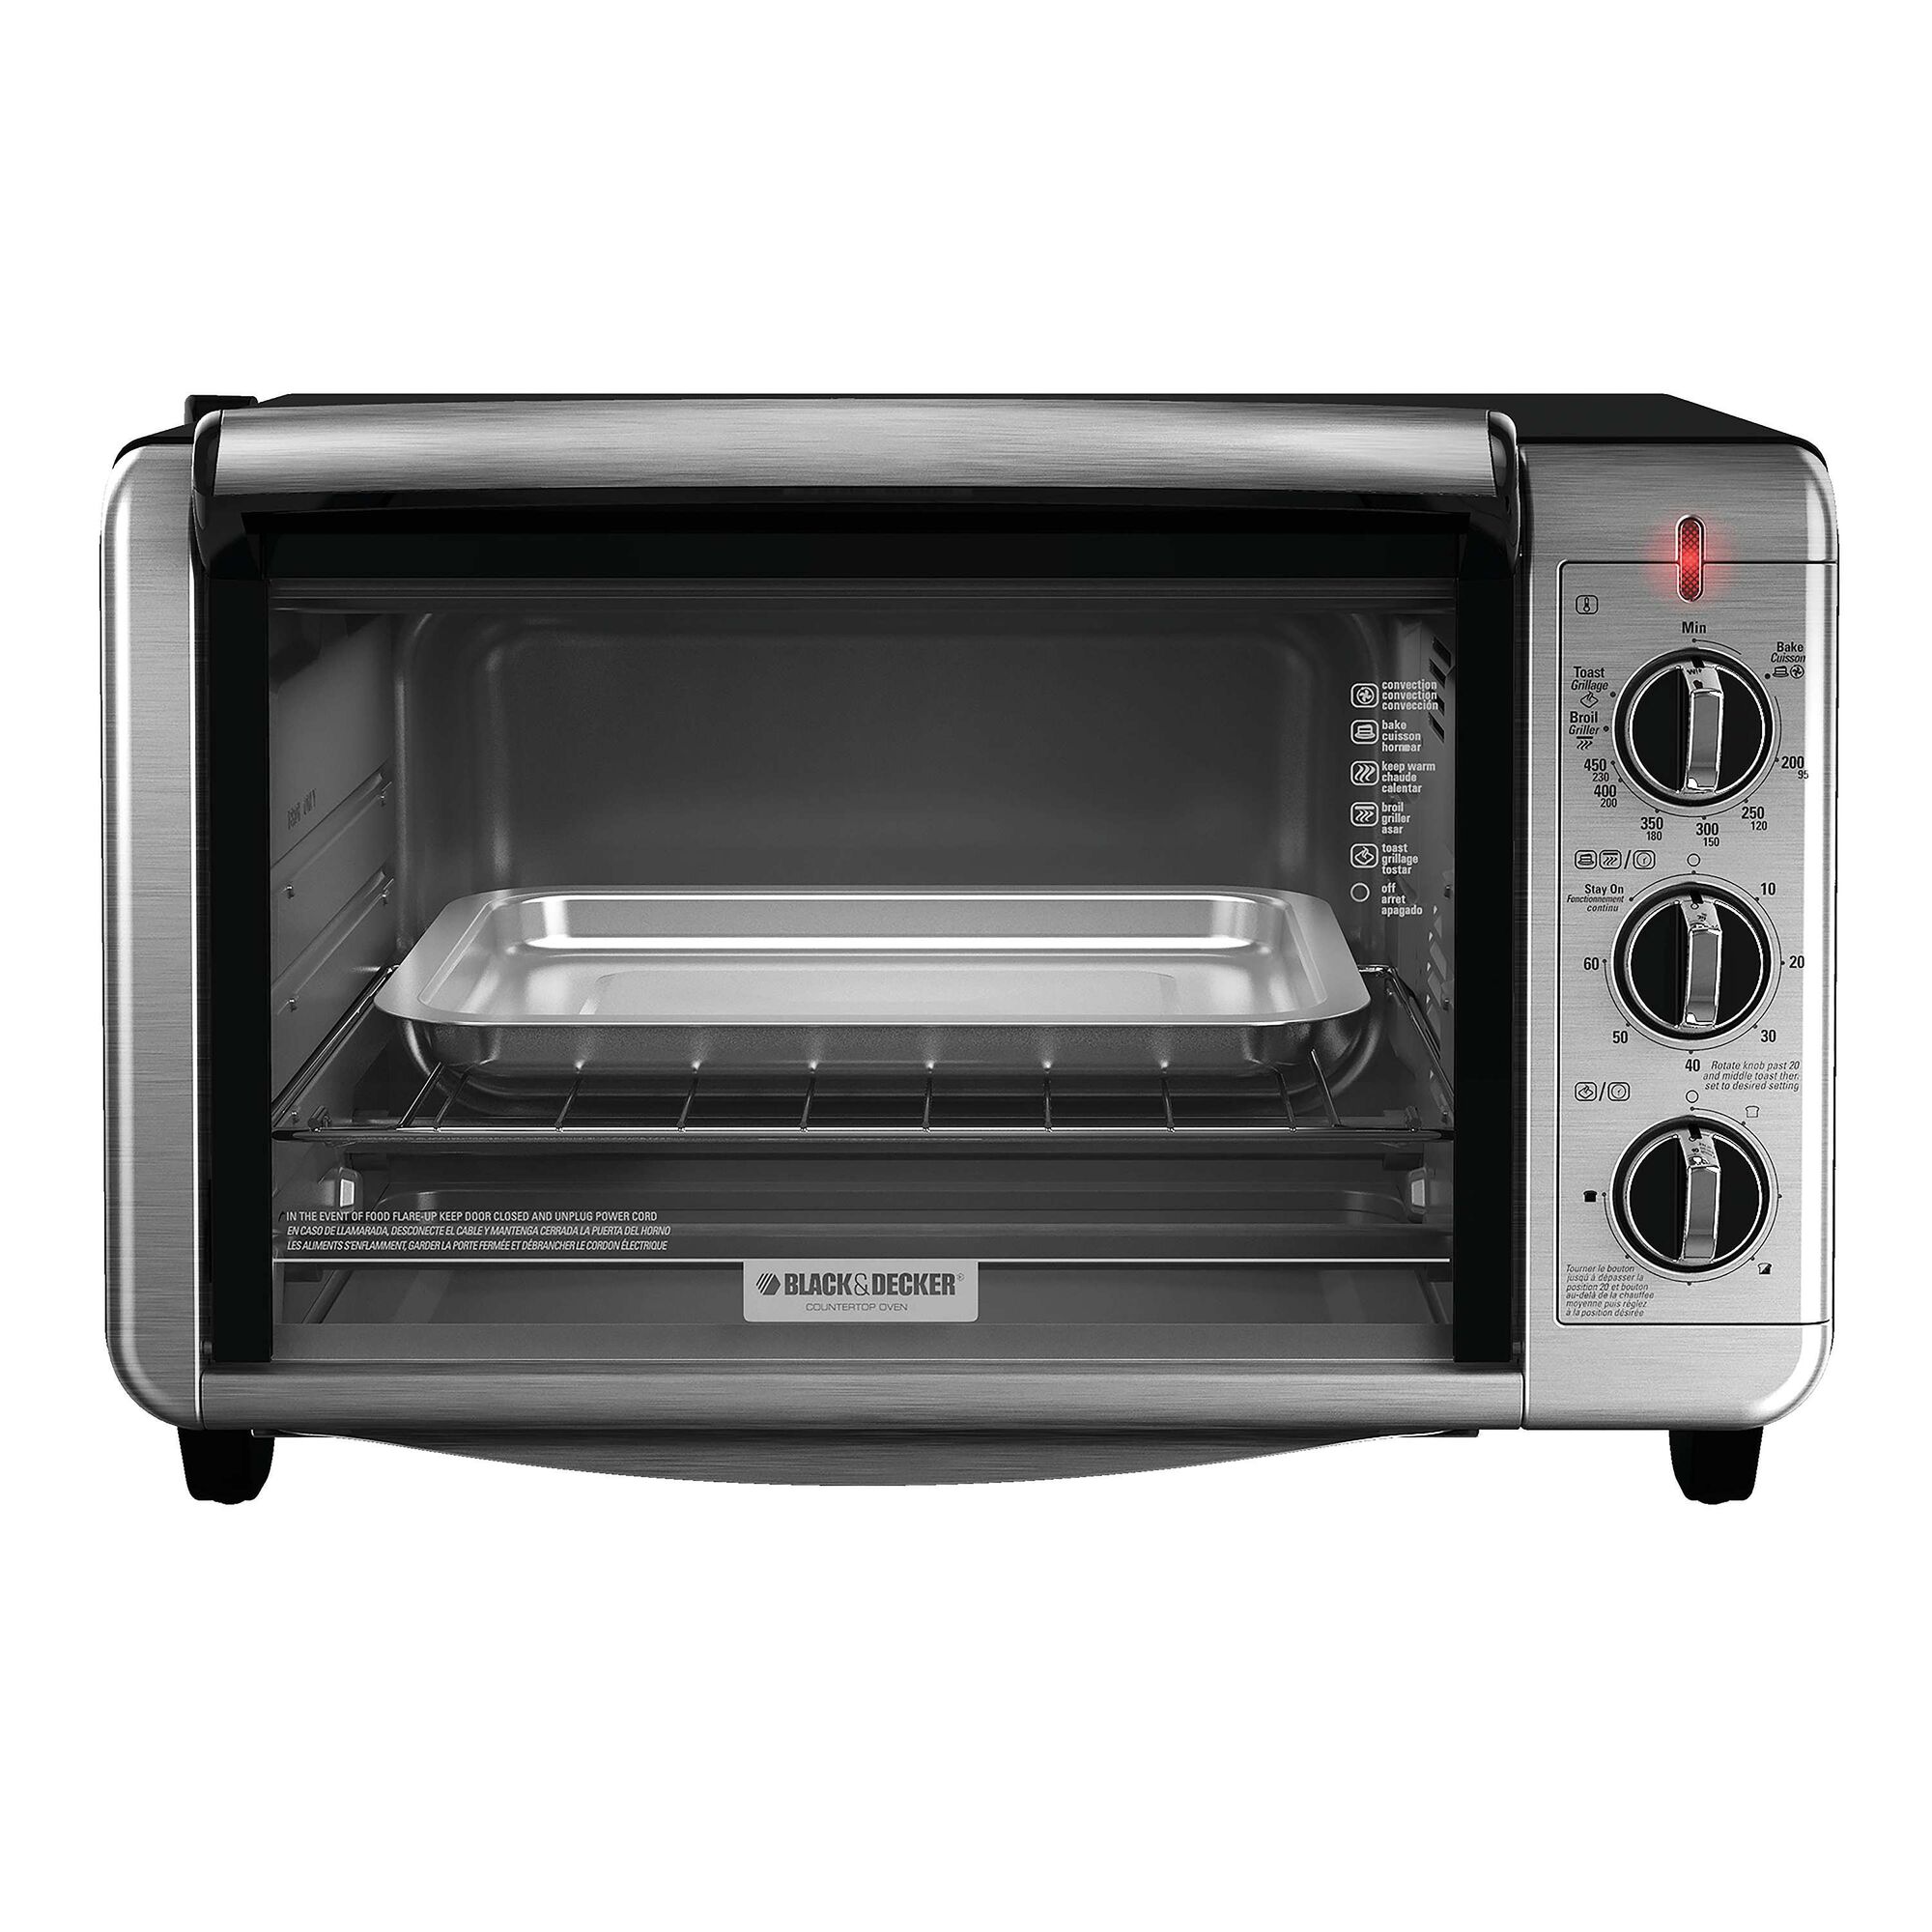 6 slice convection countertop toaster oven.